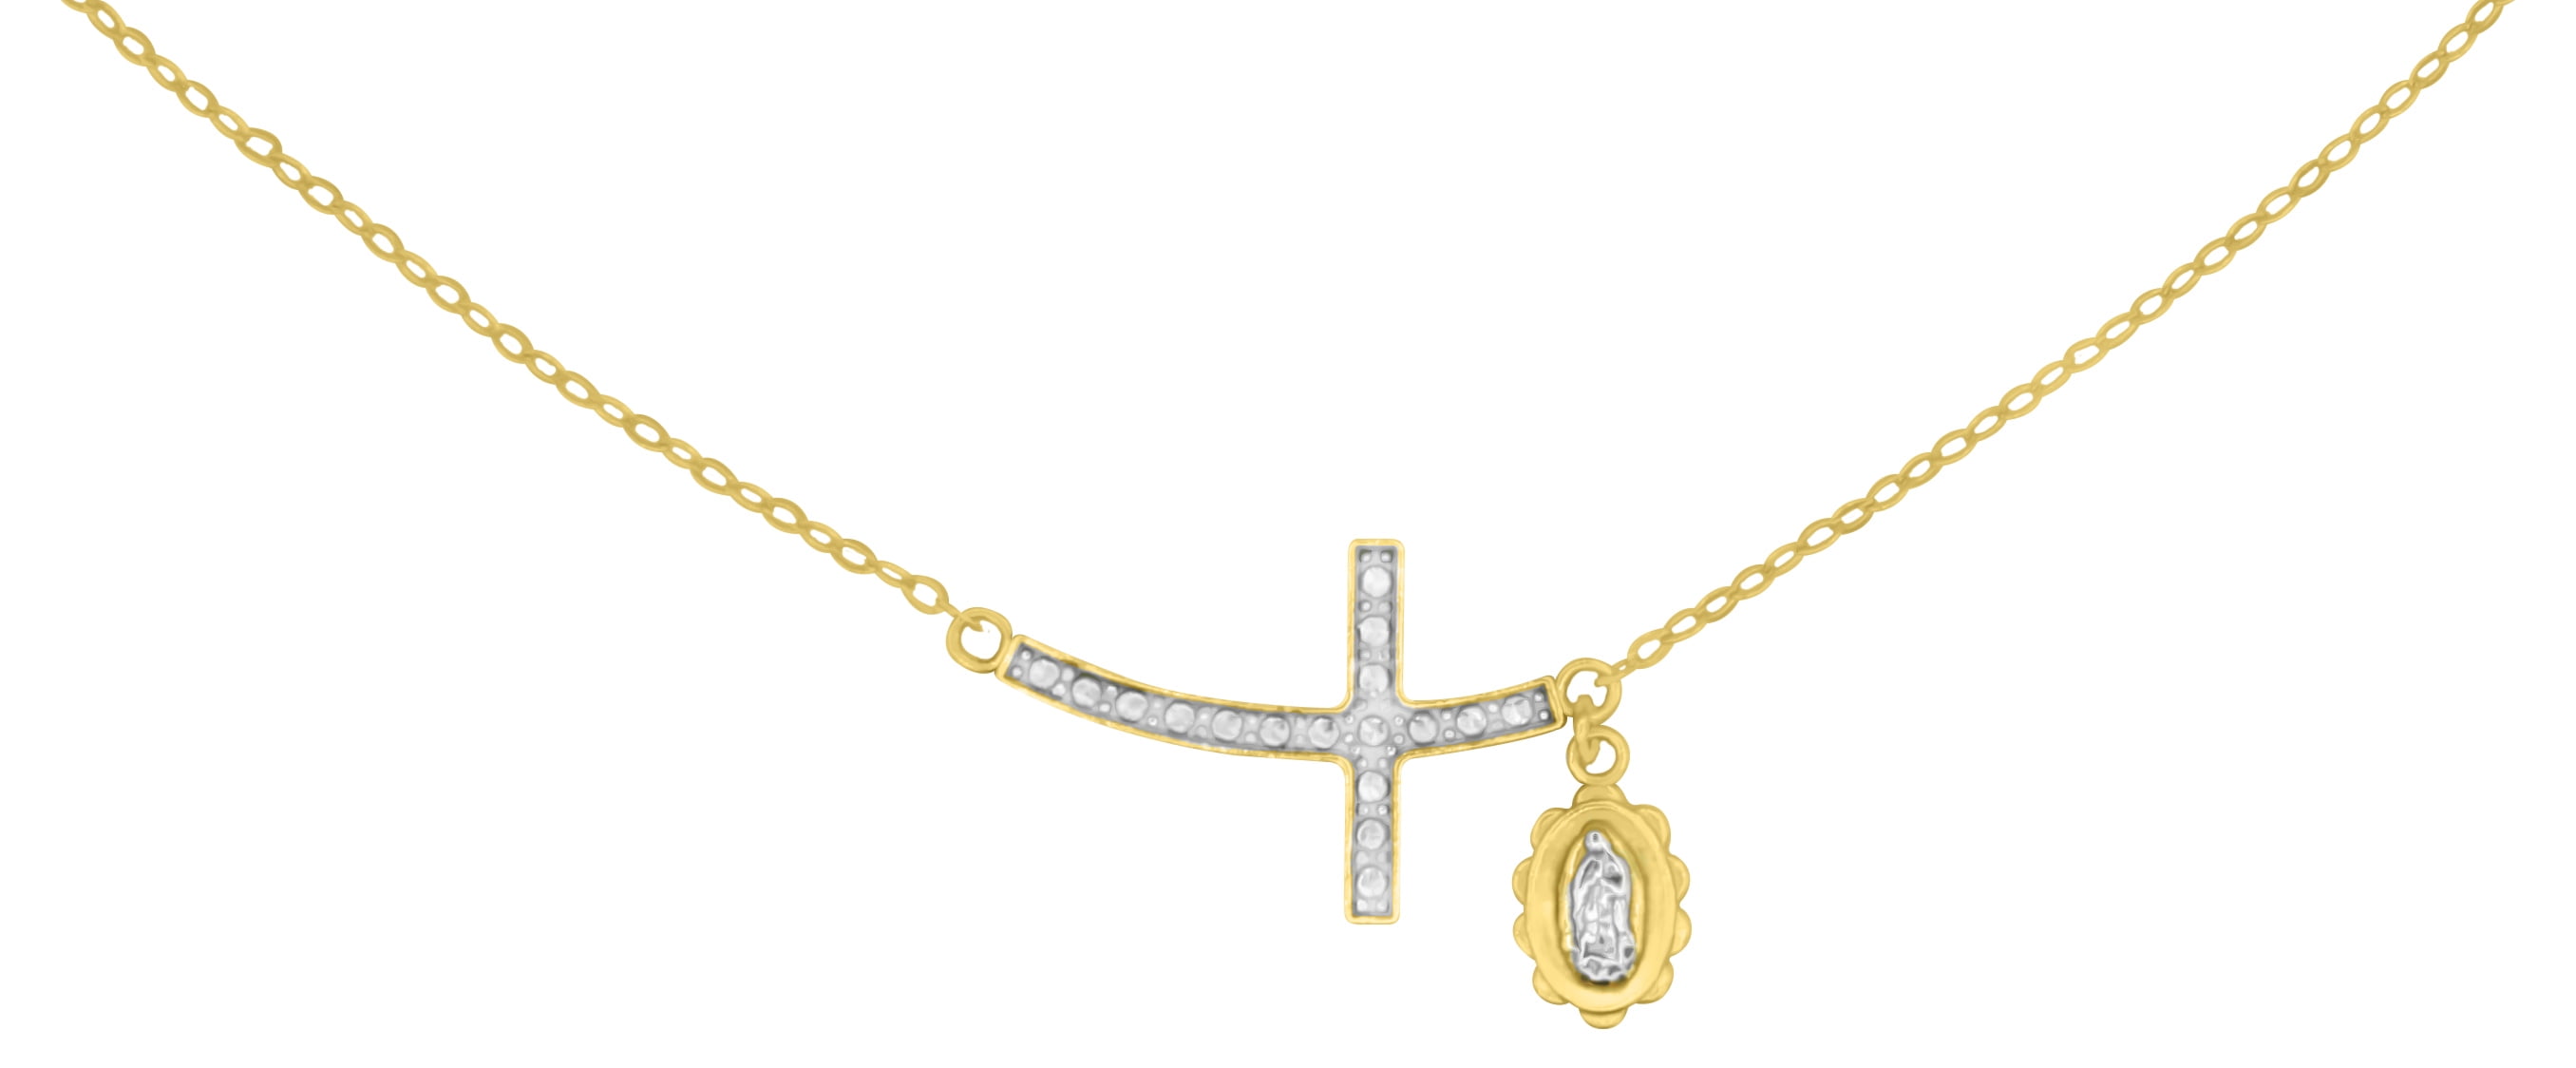 Brilliance Fine Jewelry 14K Gold Plated Sterling Silver Sideways Two-Tone Cross and Guadalupe Female Necklace 18"